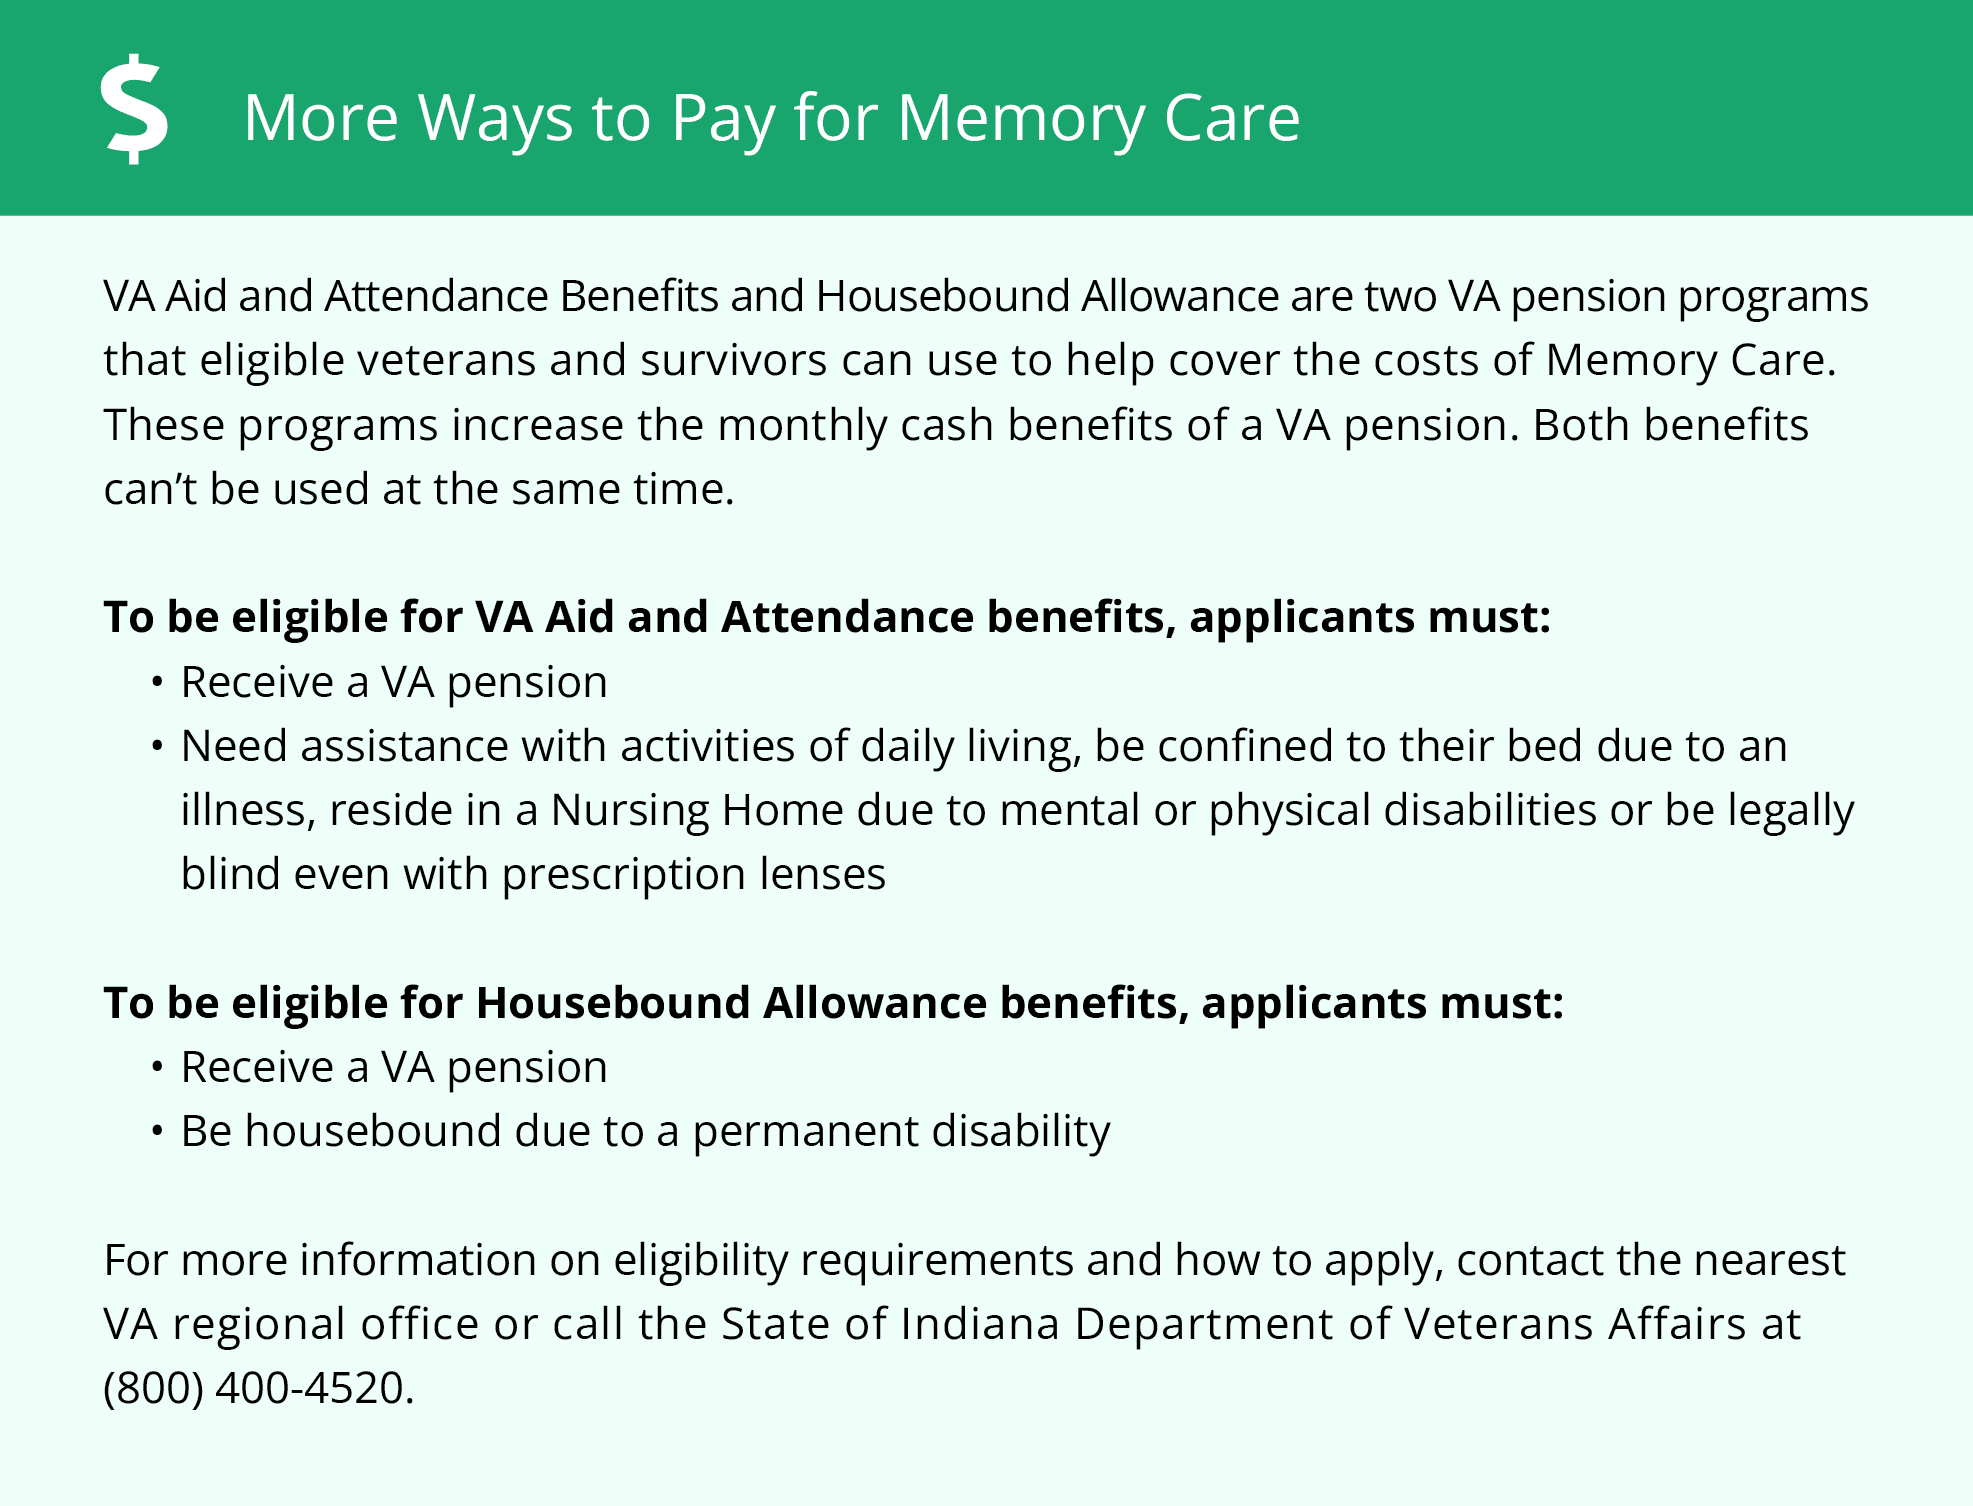 More ways to pay for memory care in IN